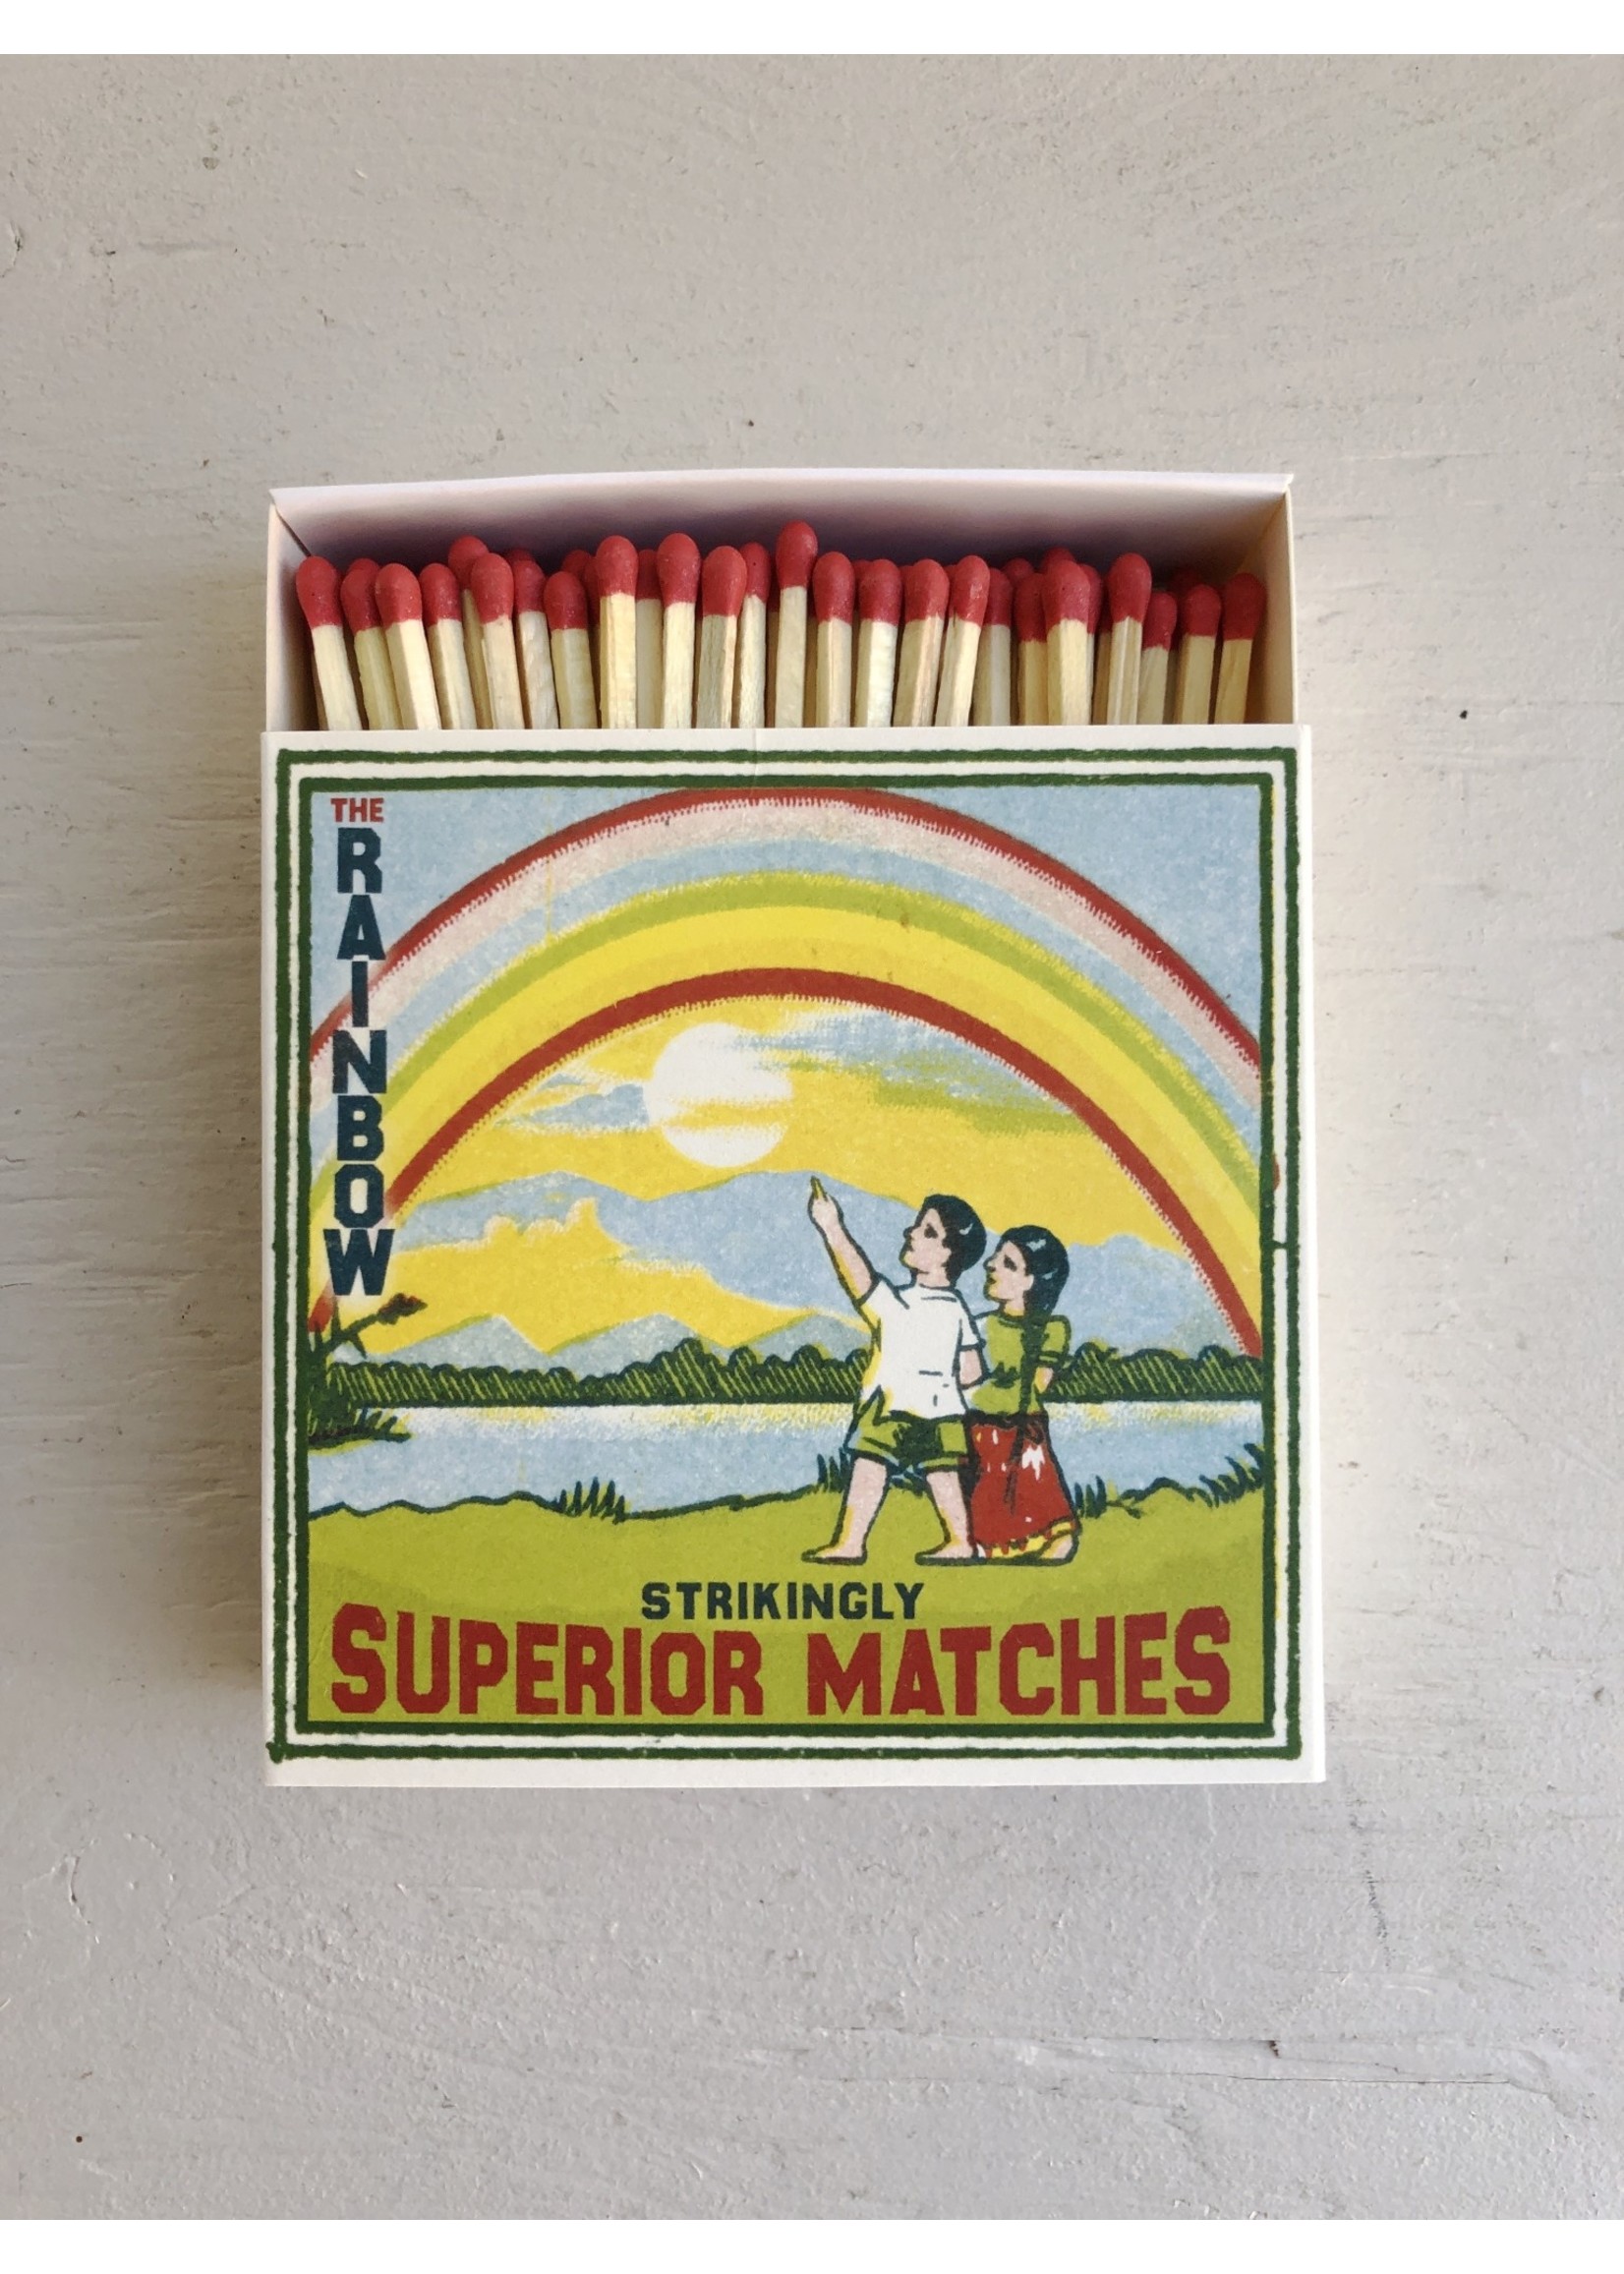 Archivist Box of Matches by Archivist